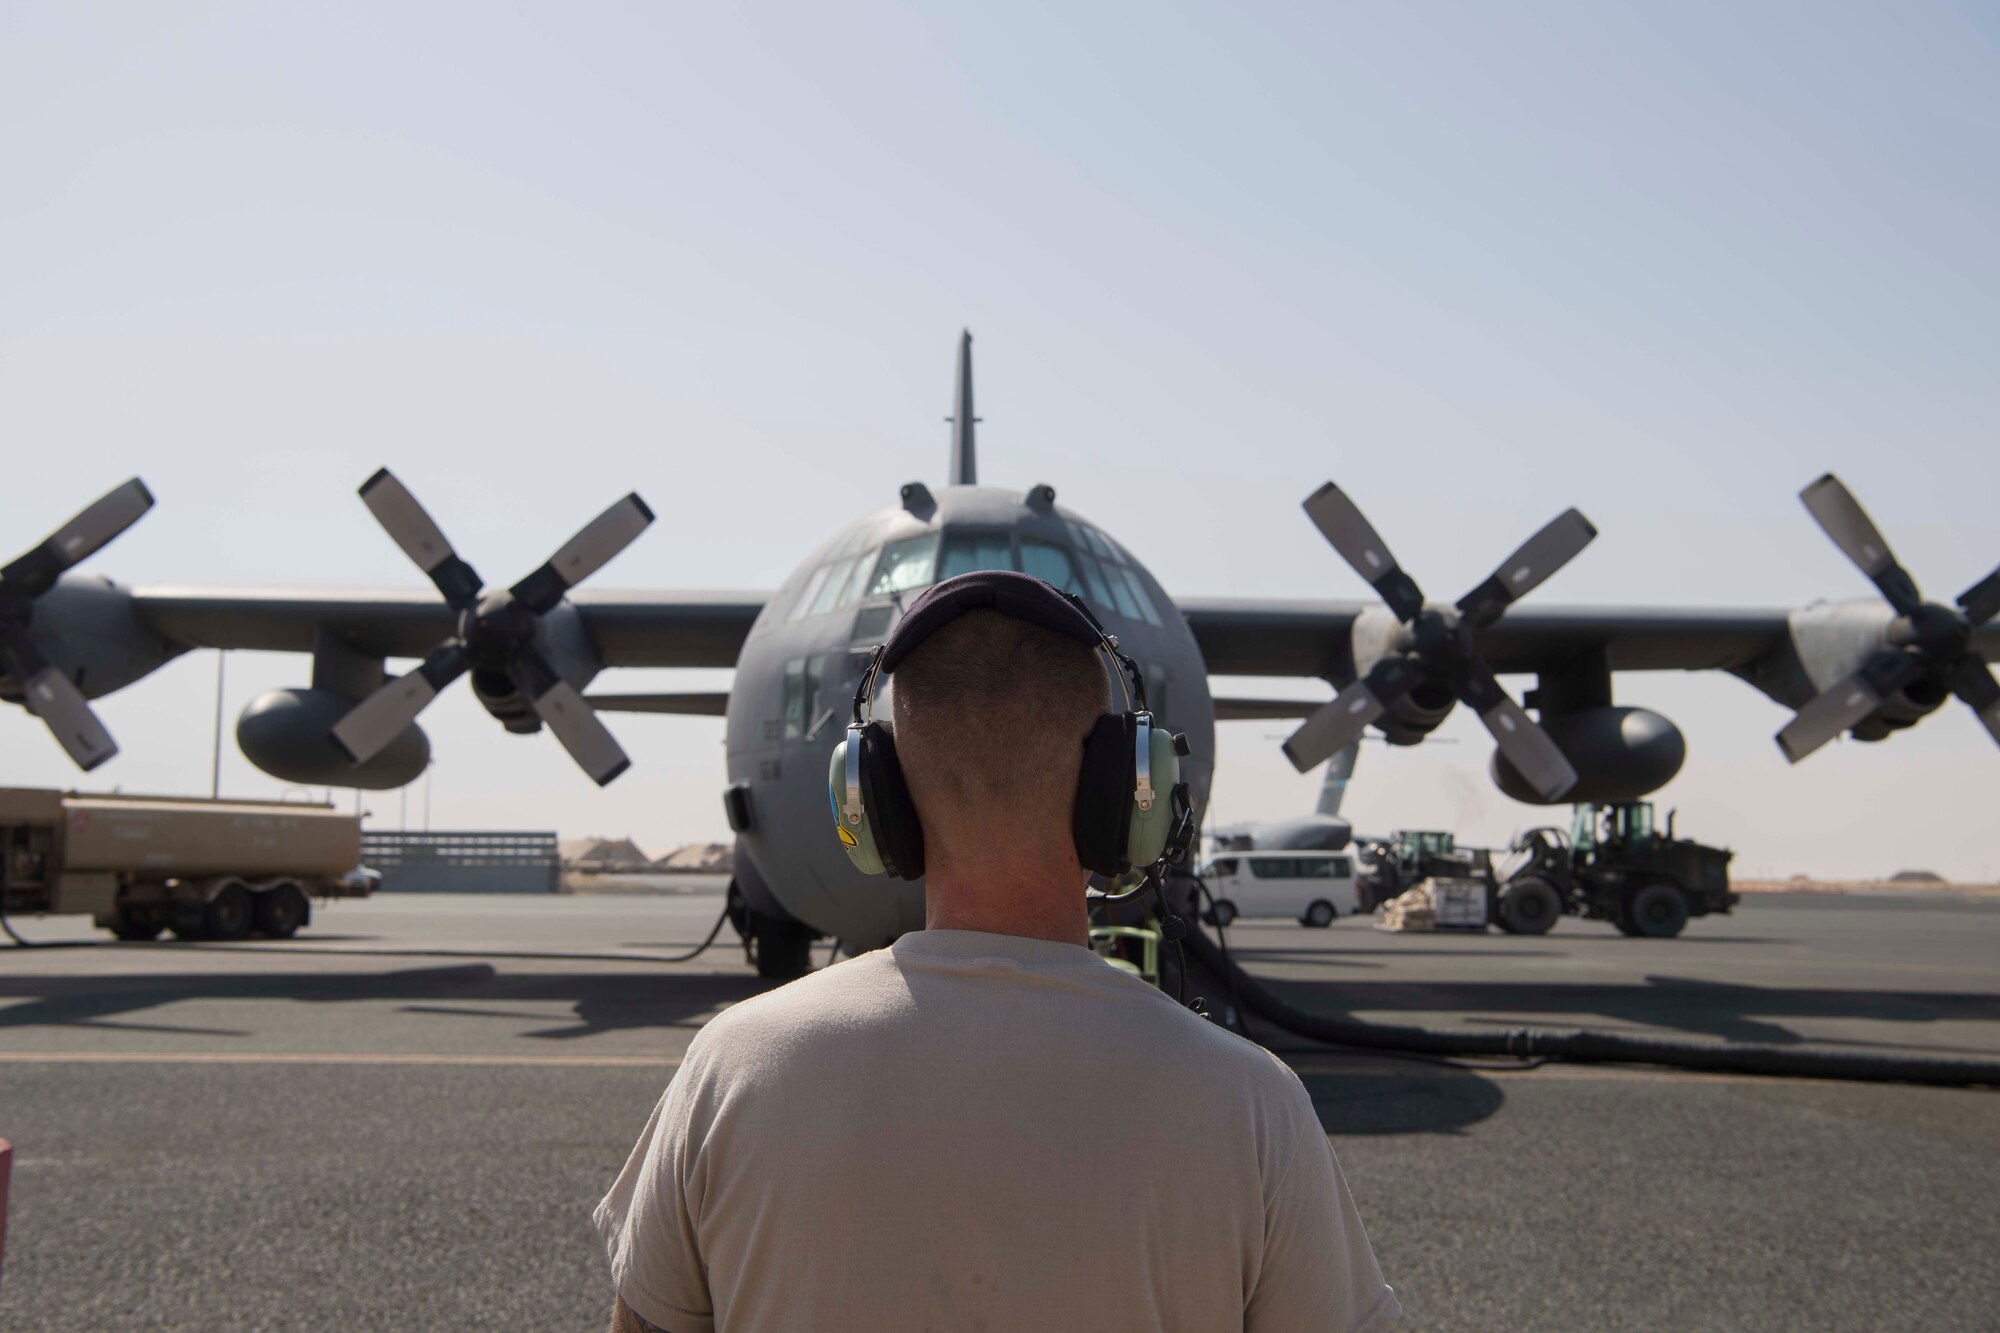 C-130’s - maintained to keep flying